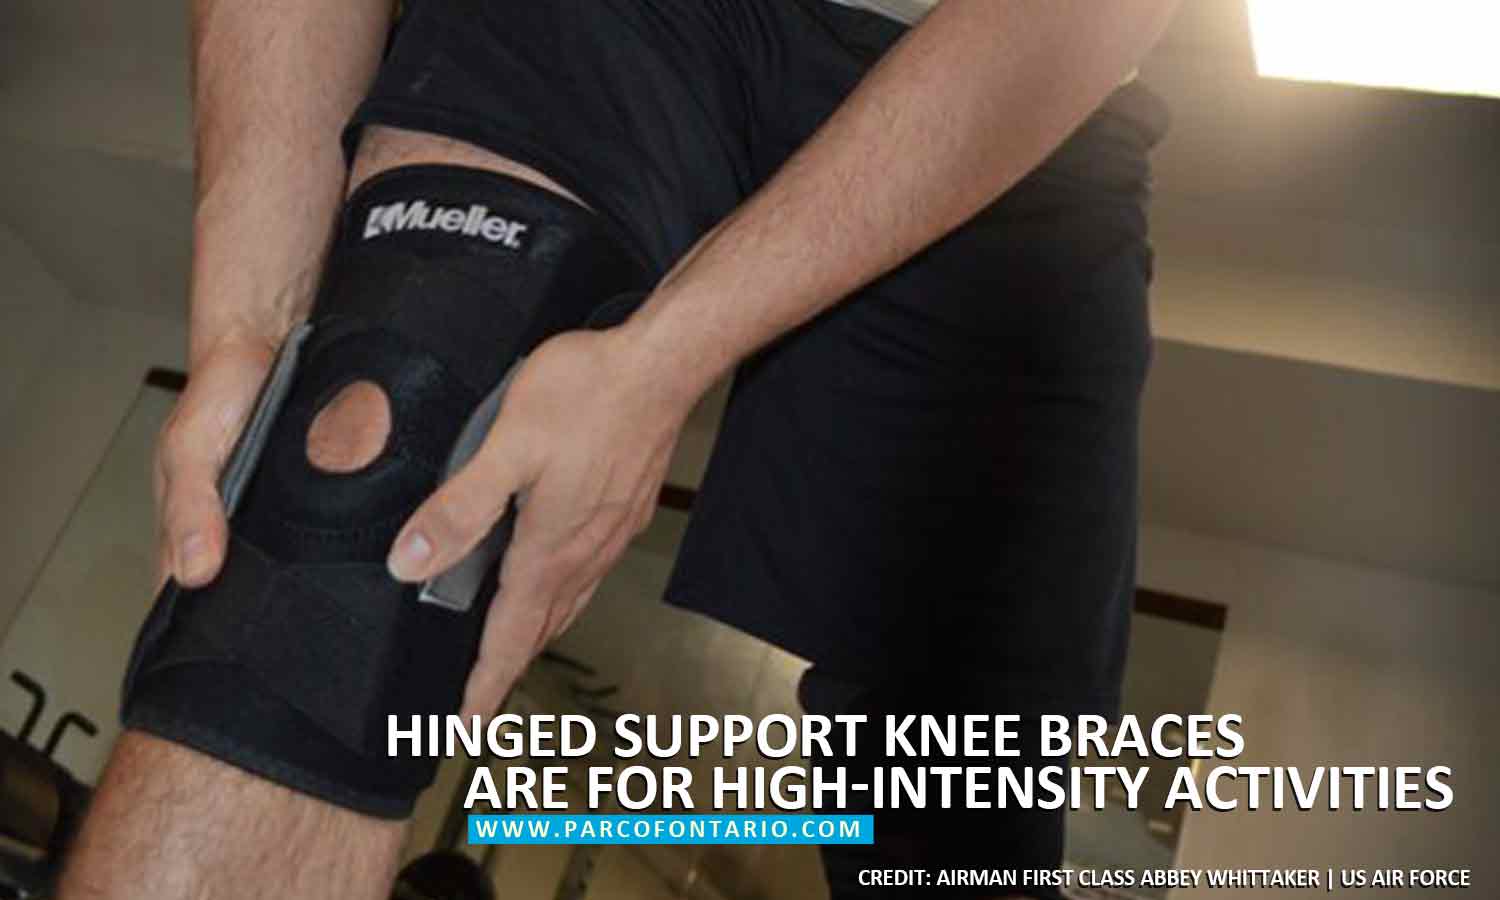 Hinged support knee braces